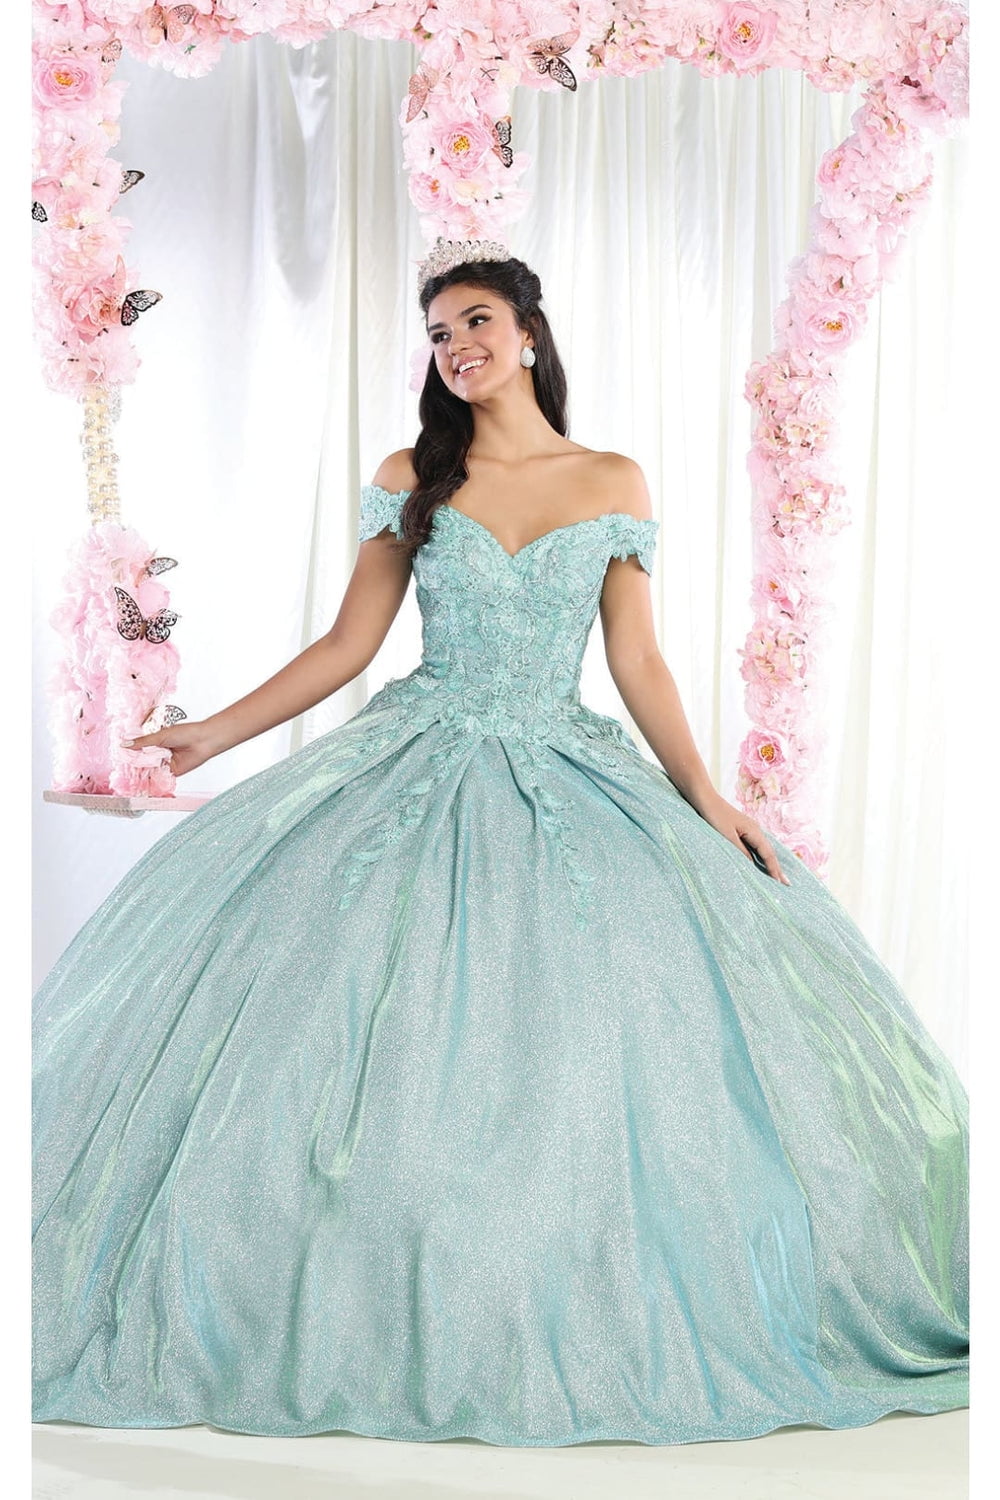 gvdentm Maternity Dresses Women's Heavy Beaded Sweetheart Ball Gowns  Dresses Organza Ruffles Quinceanera Dresses for Sweet